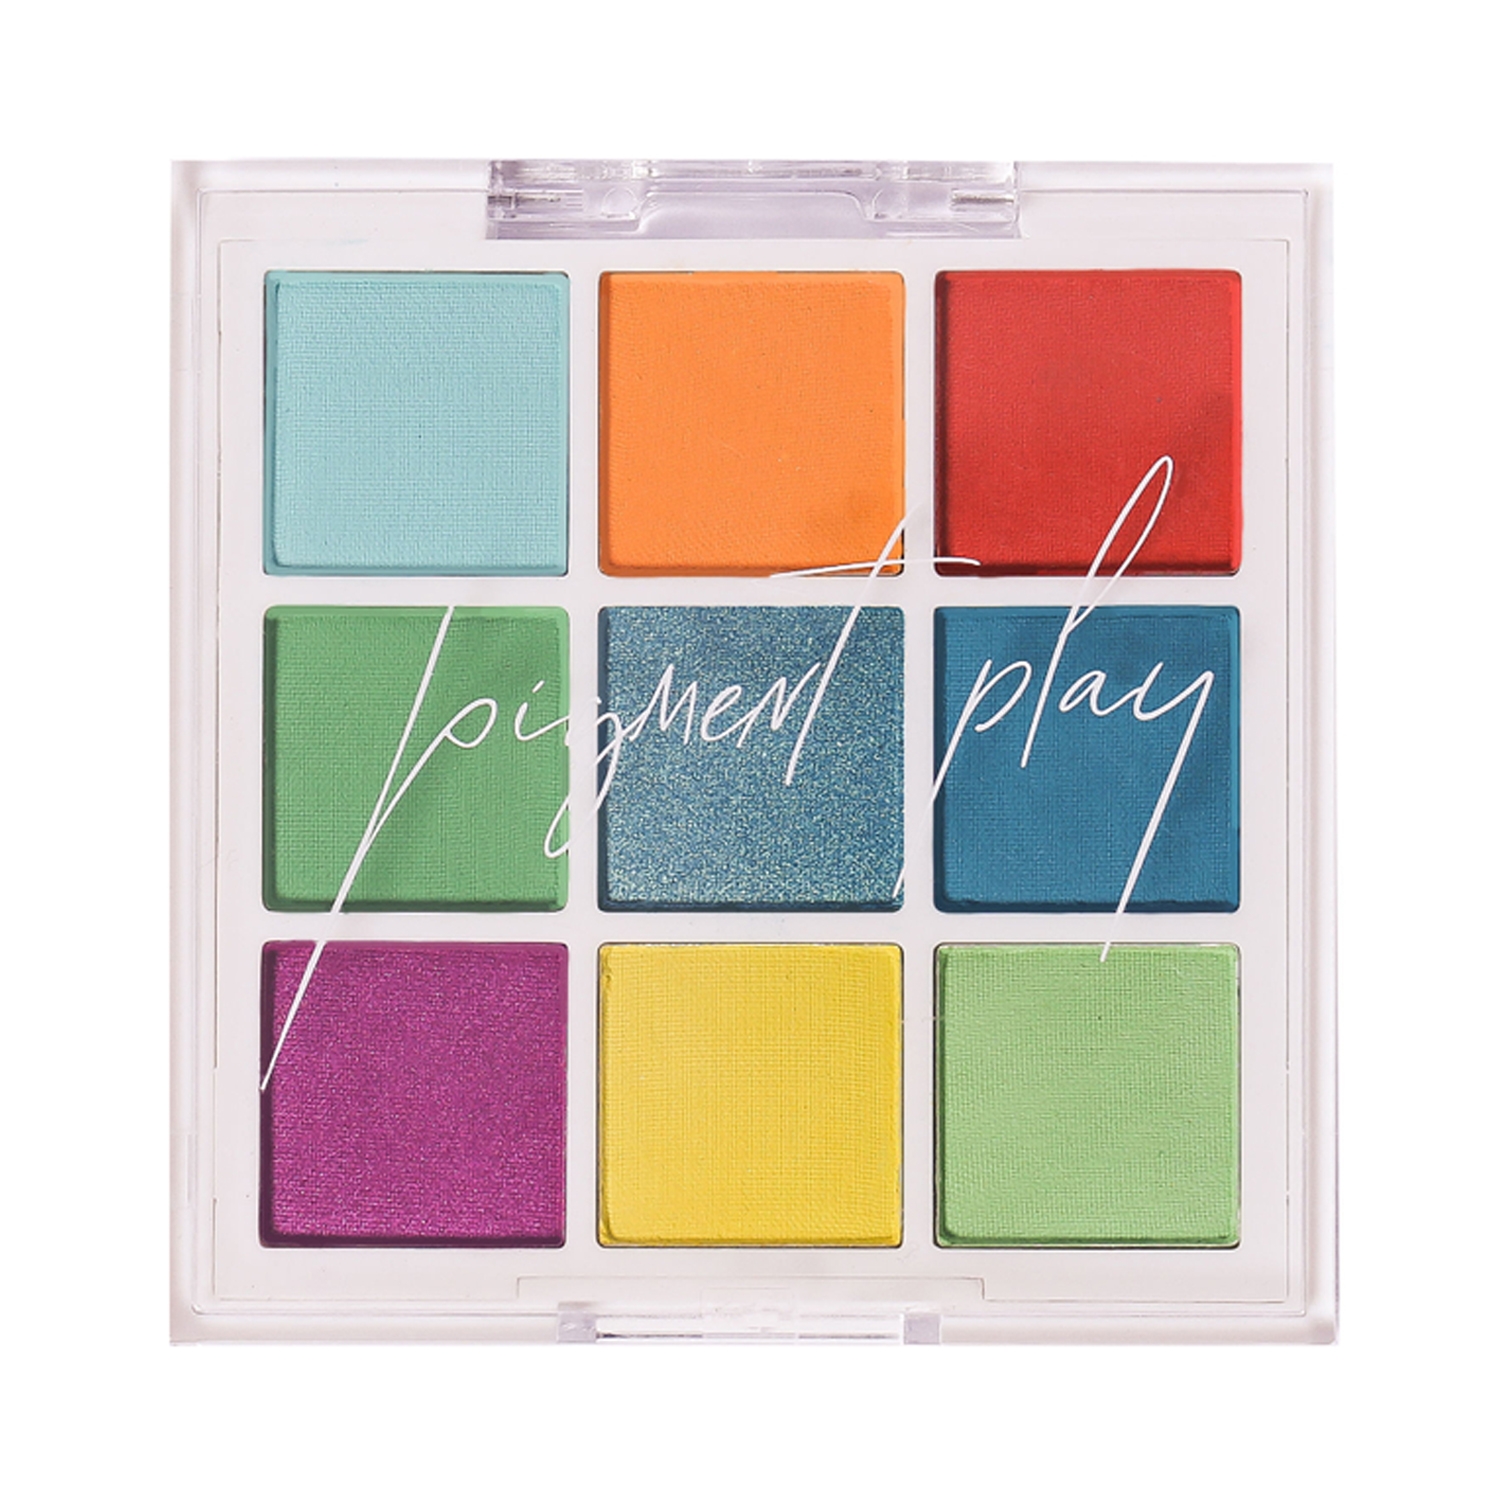 Pigment Play | Pigment Play Playground Hero Shadow Palette - Tropical Vacation (9g)